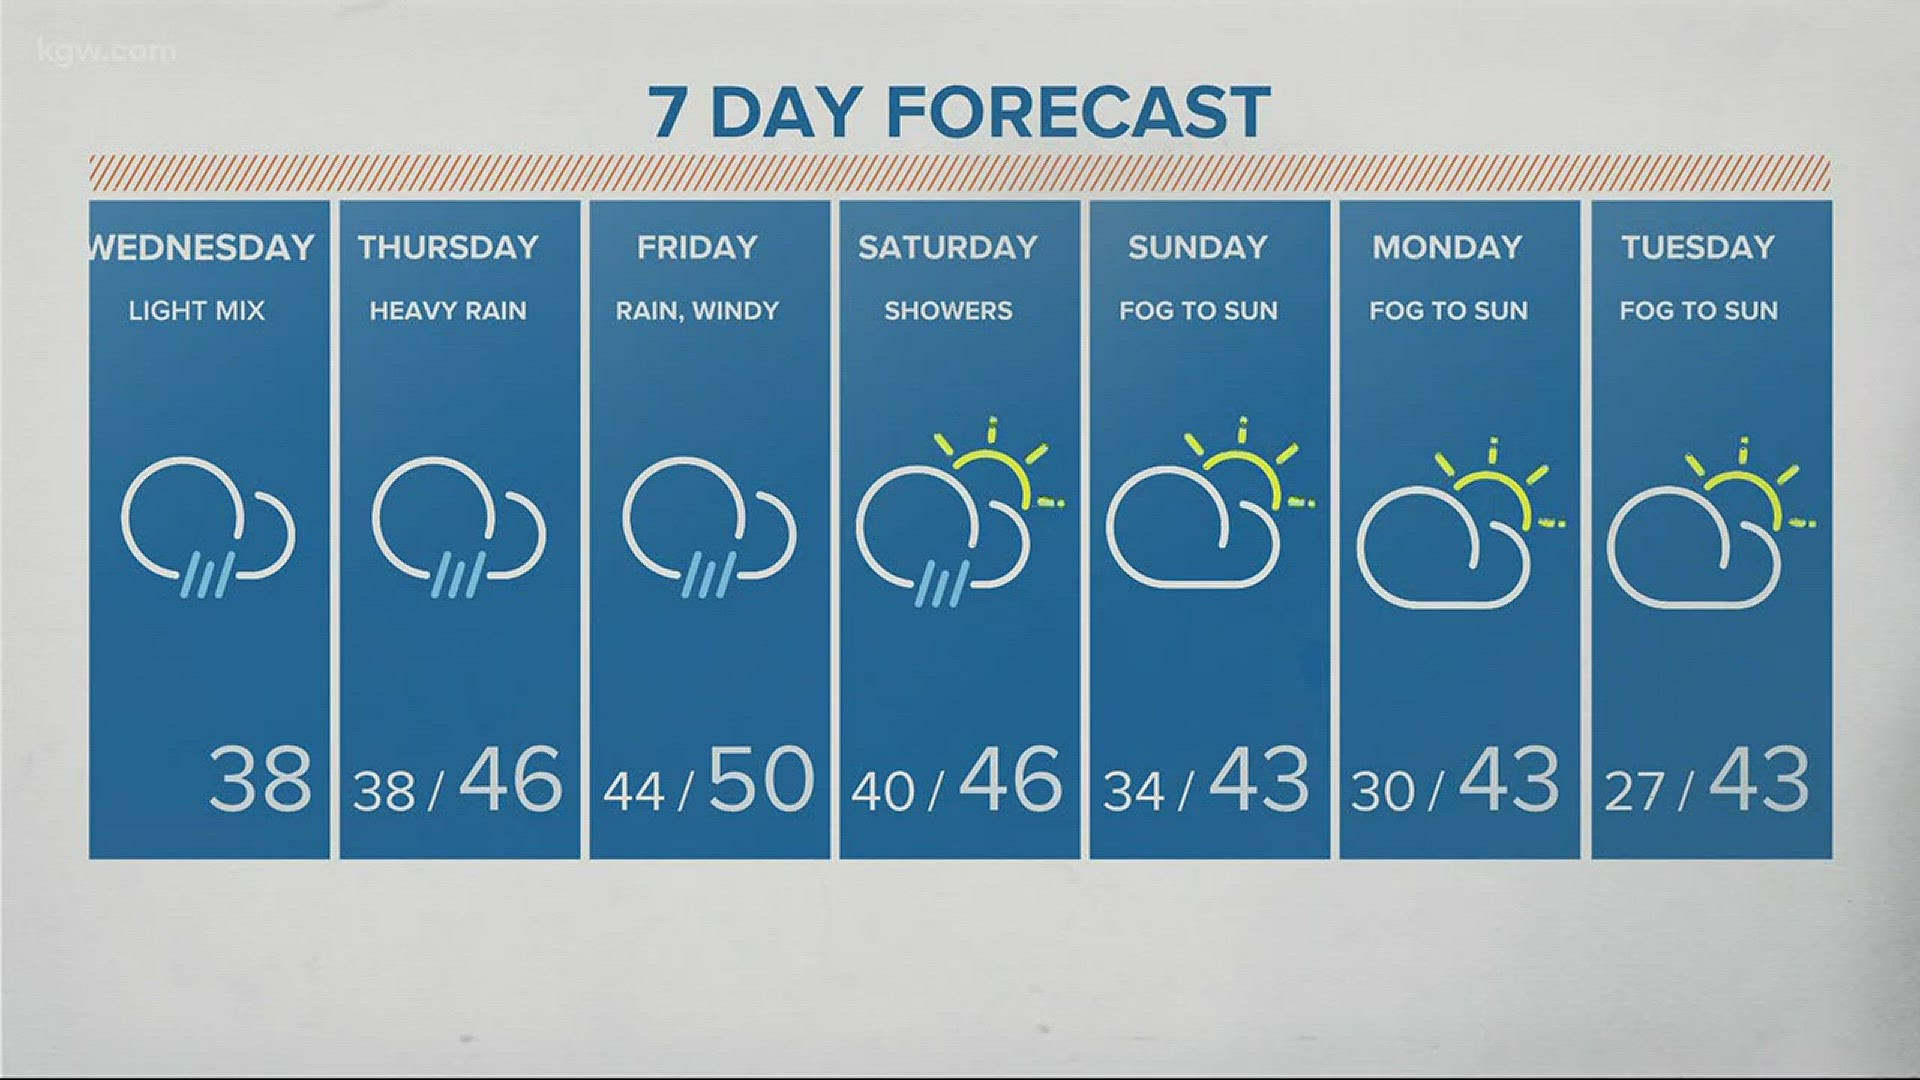 KGW Noon forecast 12-27-17